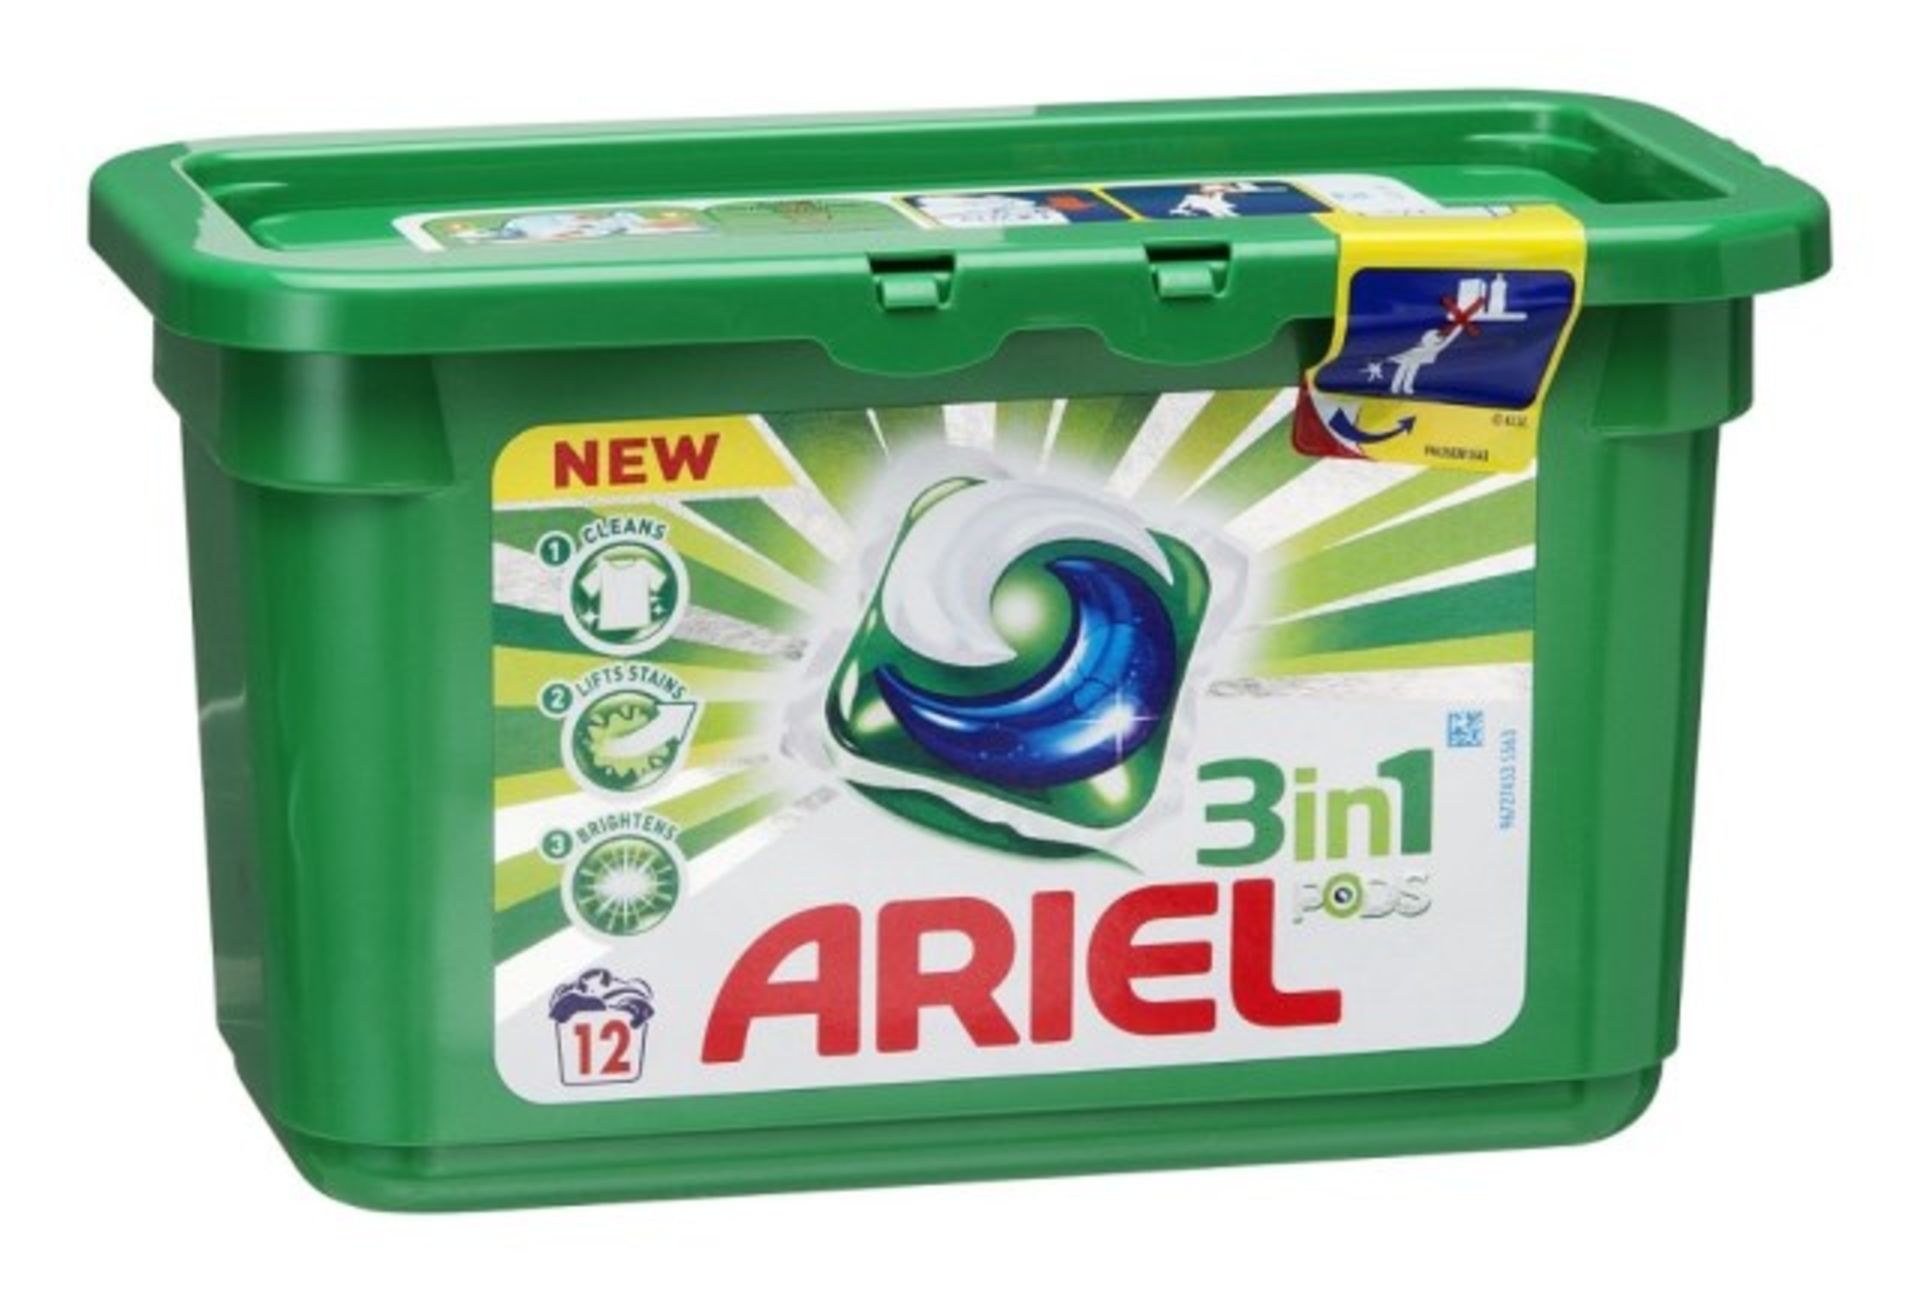 V Brand New Ariel 3 in 1 Pods 12 Wash Pack RRP8.99